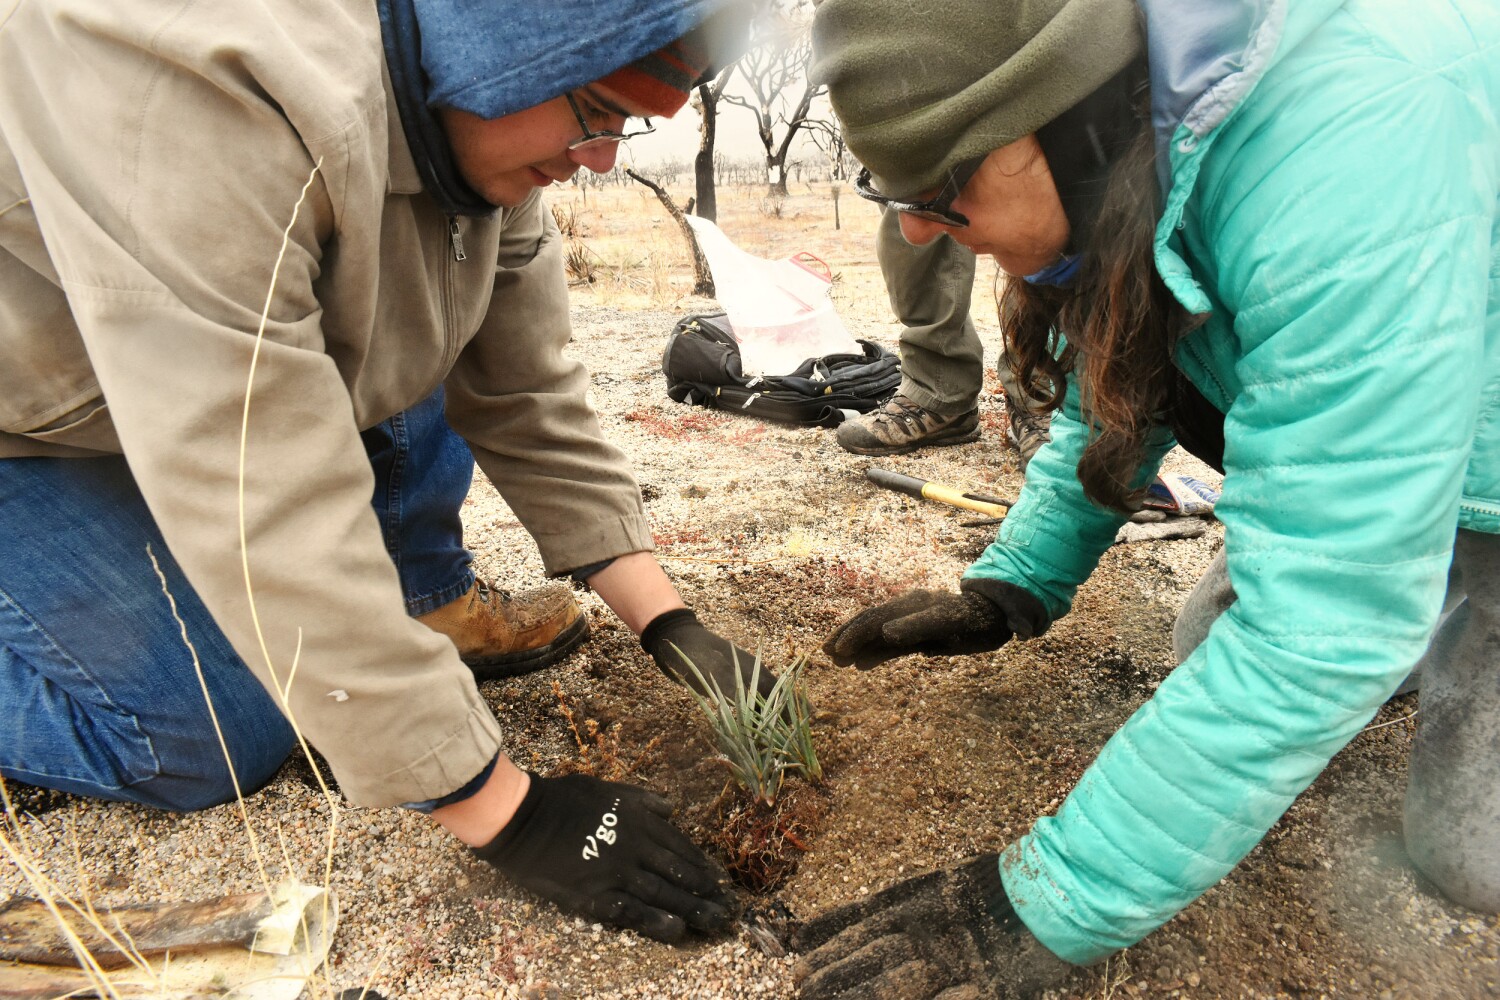 Seedling by seedling, Joshua trees will rise again in fire-scorched desert